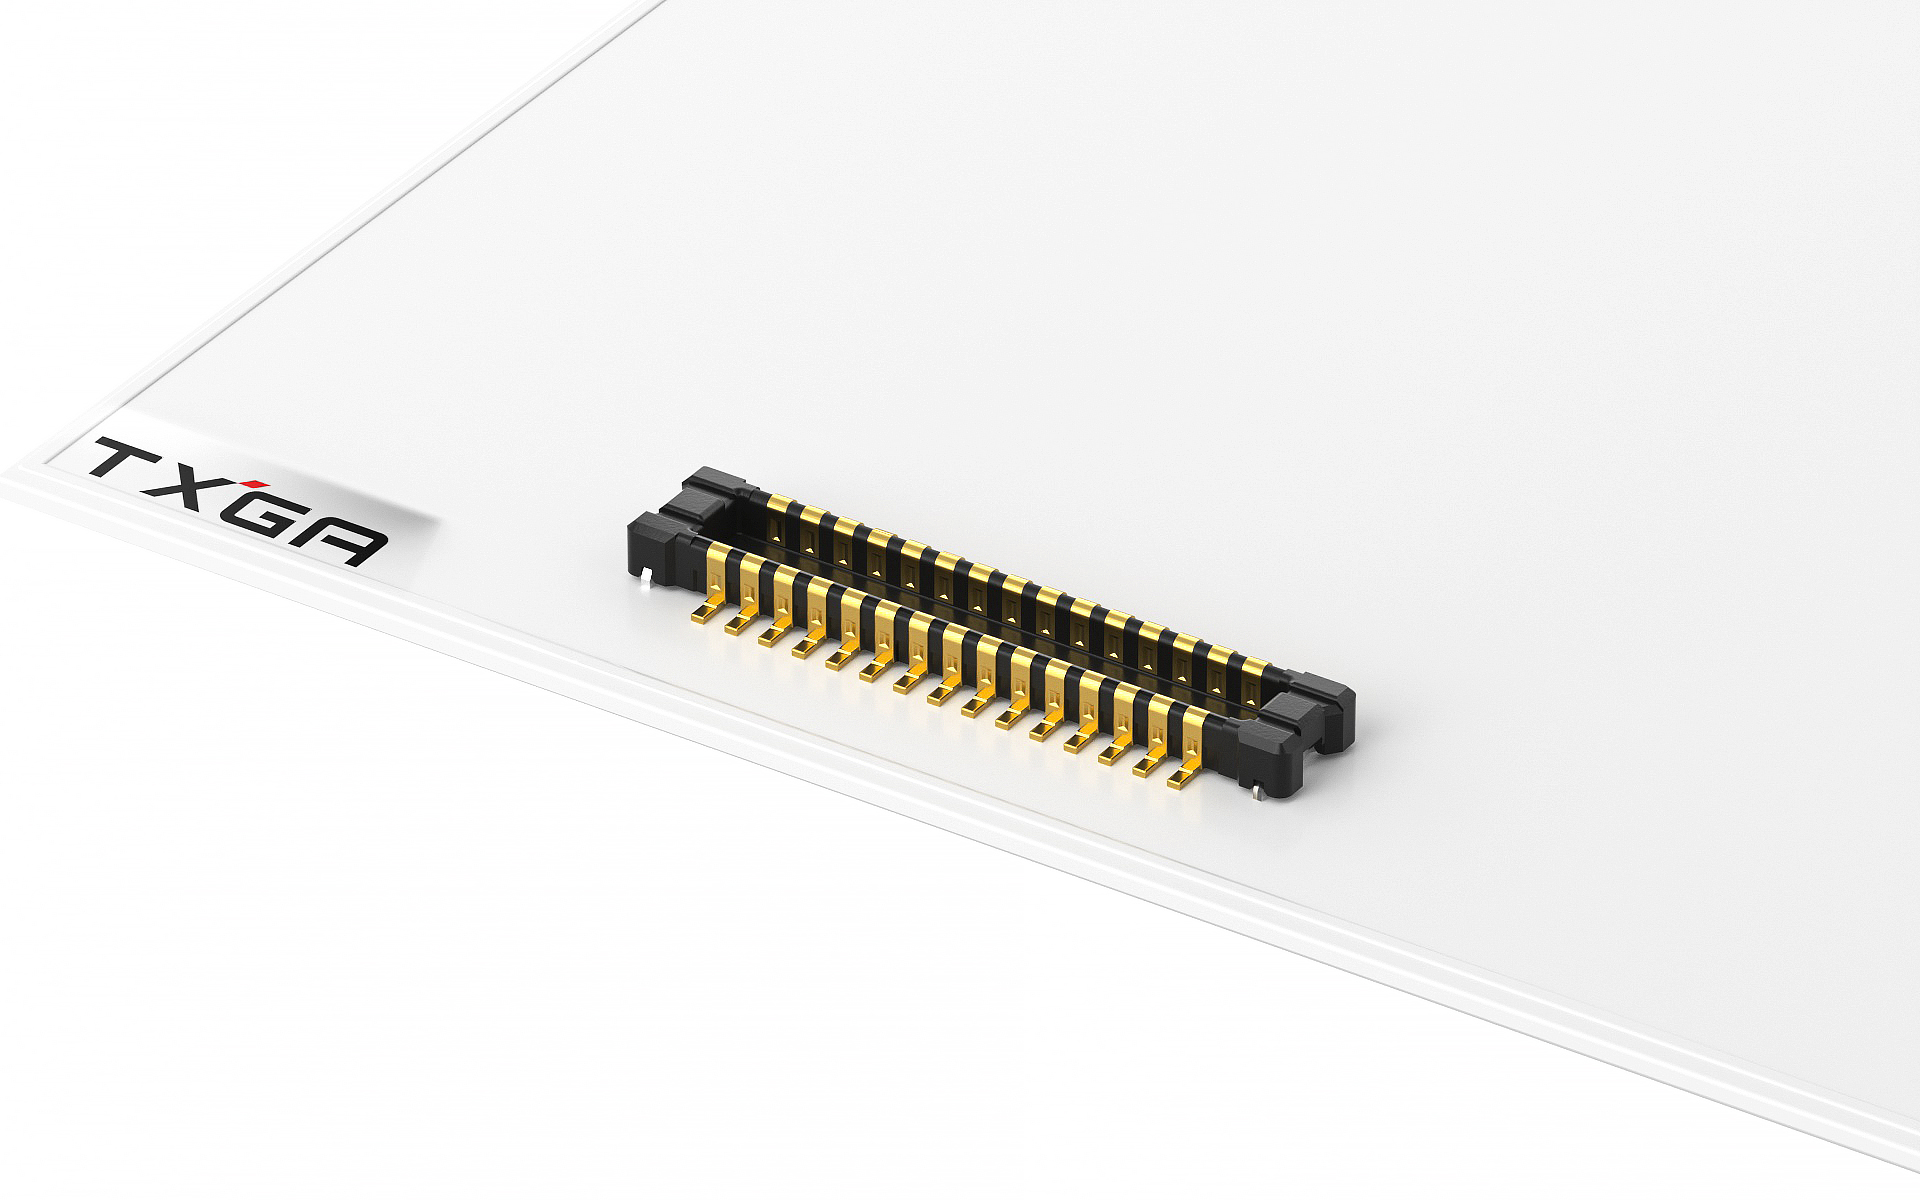 Board to Board Connector,0.4mm,Male,30Circuits,Vertical(180°),SMT (Mated height 0.8mm)